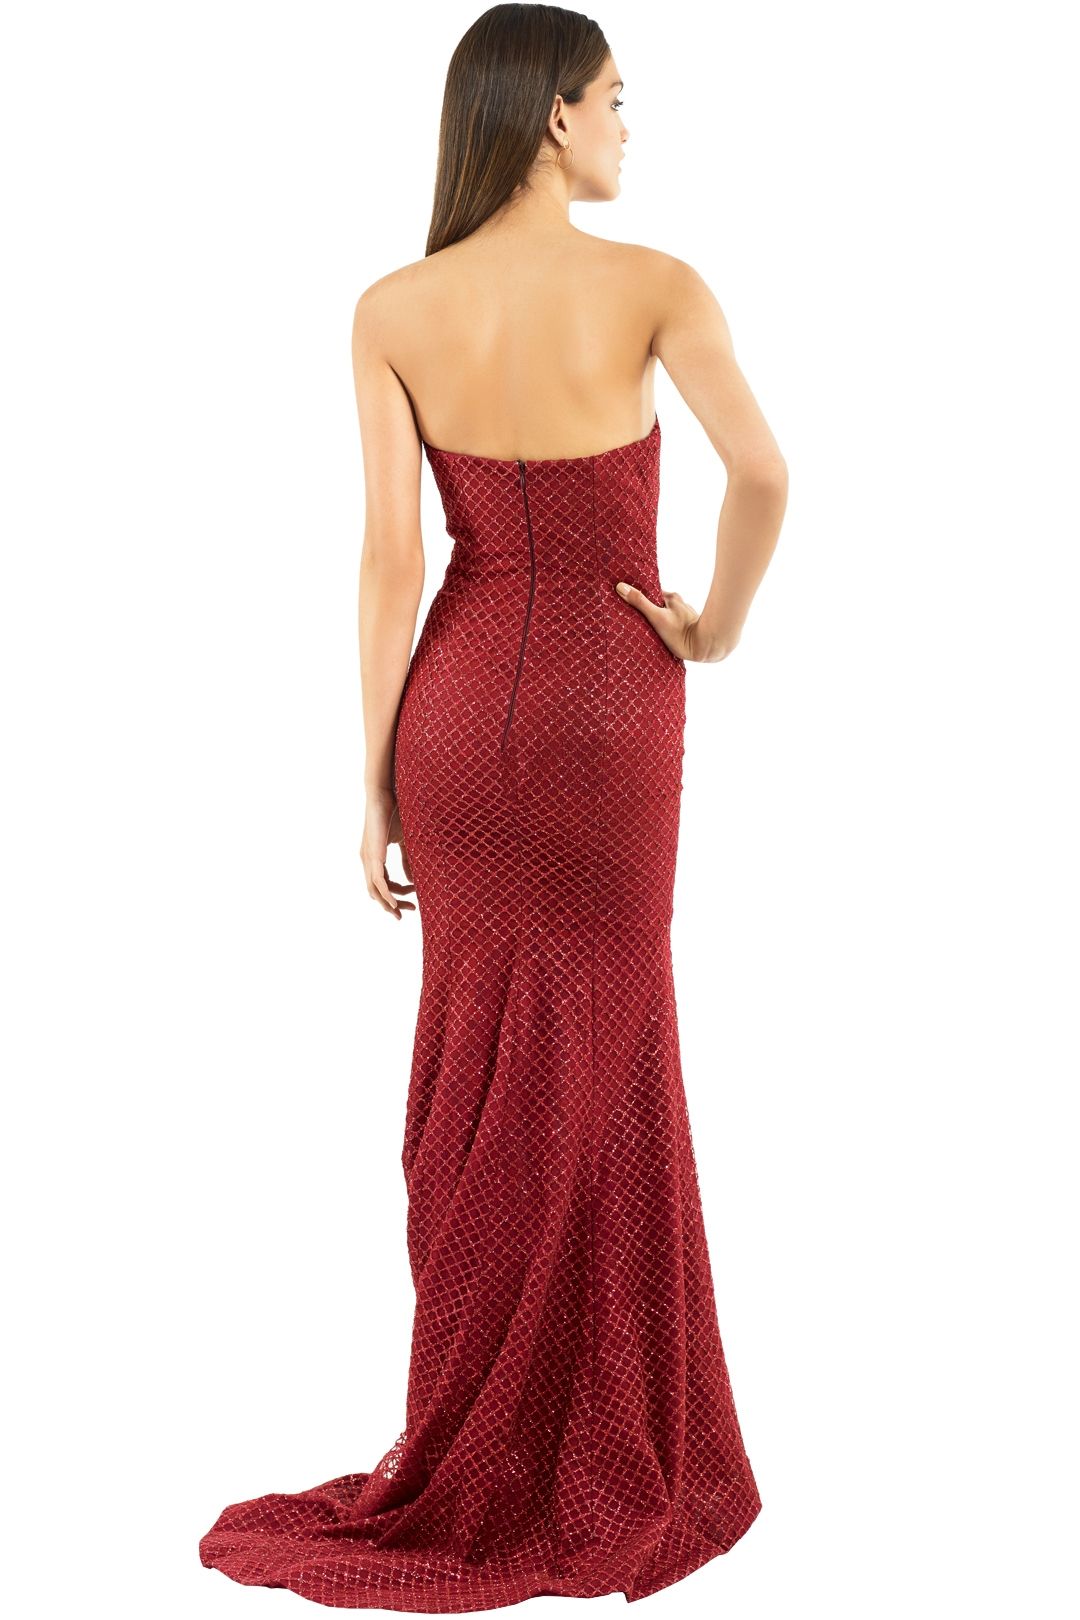 Portia and Scarlett - Tyra Strapless Gown - Red - Back